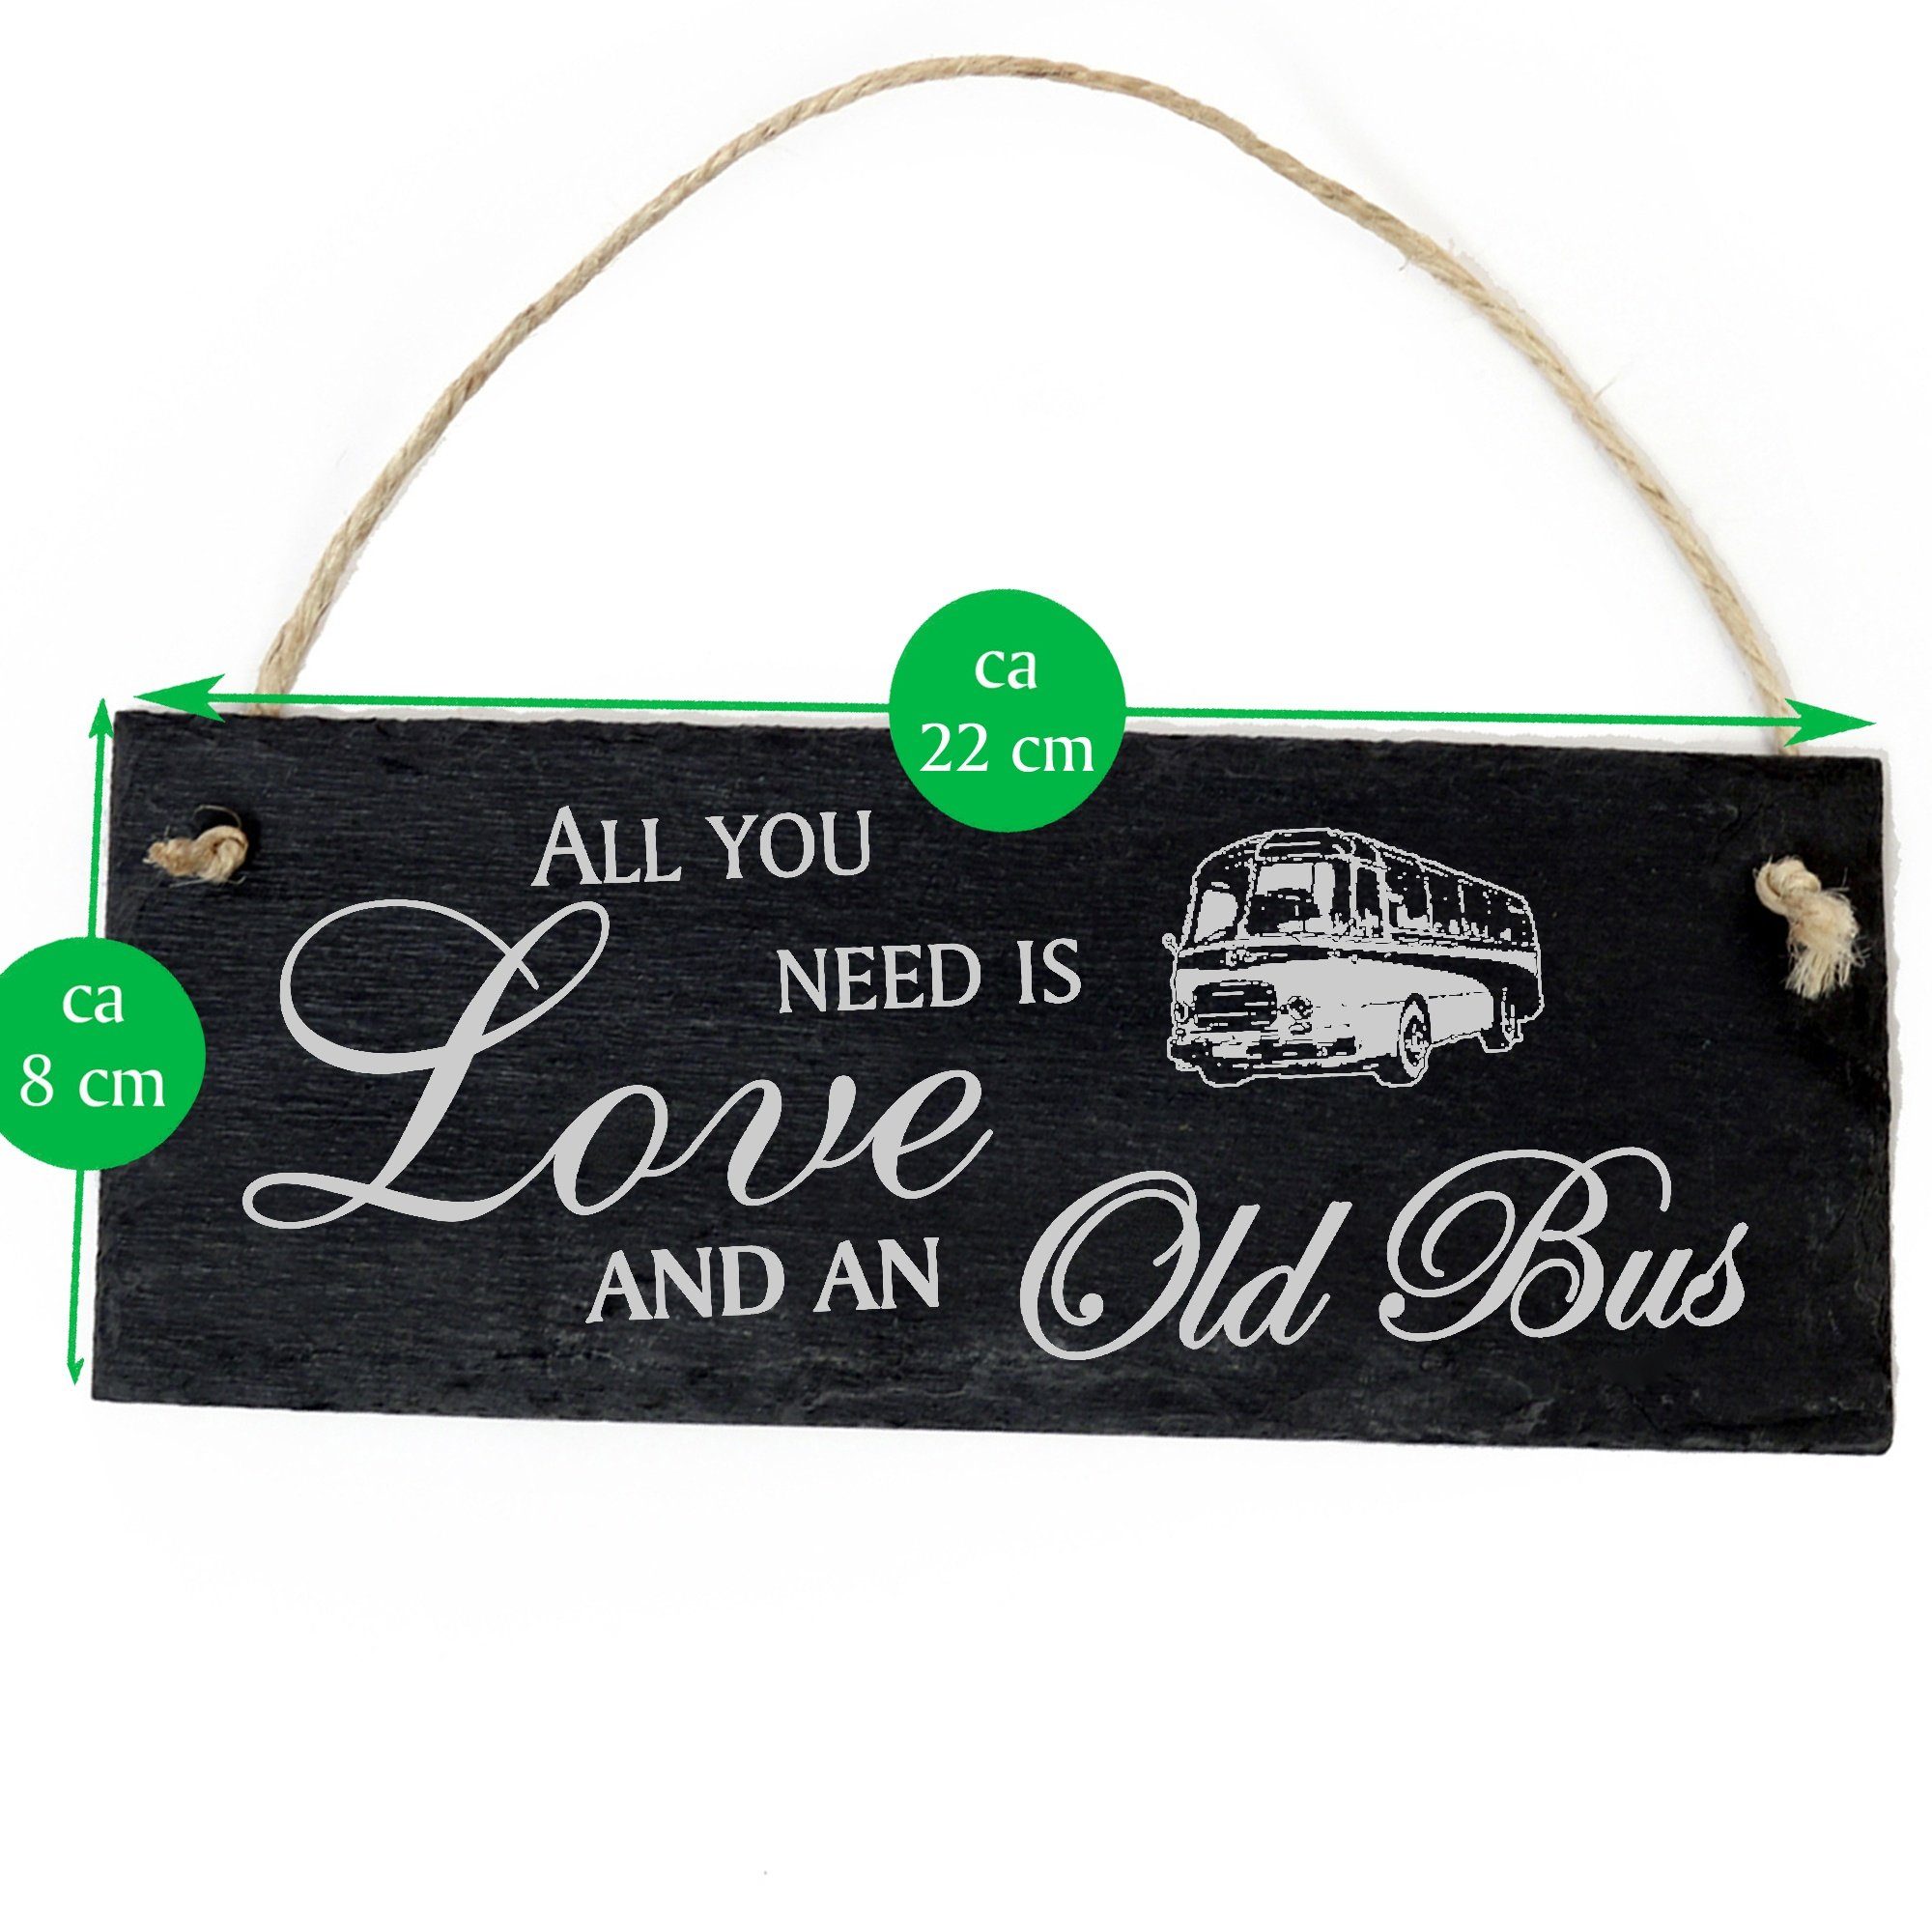 All Dekolando Bus Hängedekoration and Bus Old an is 22x8cm you Love need alter